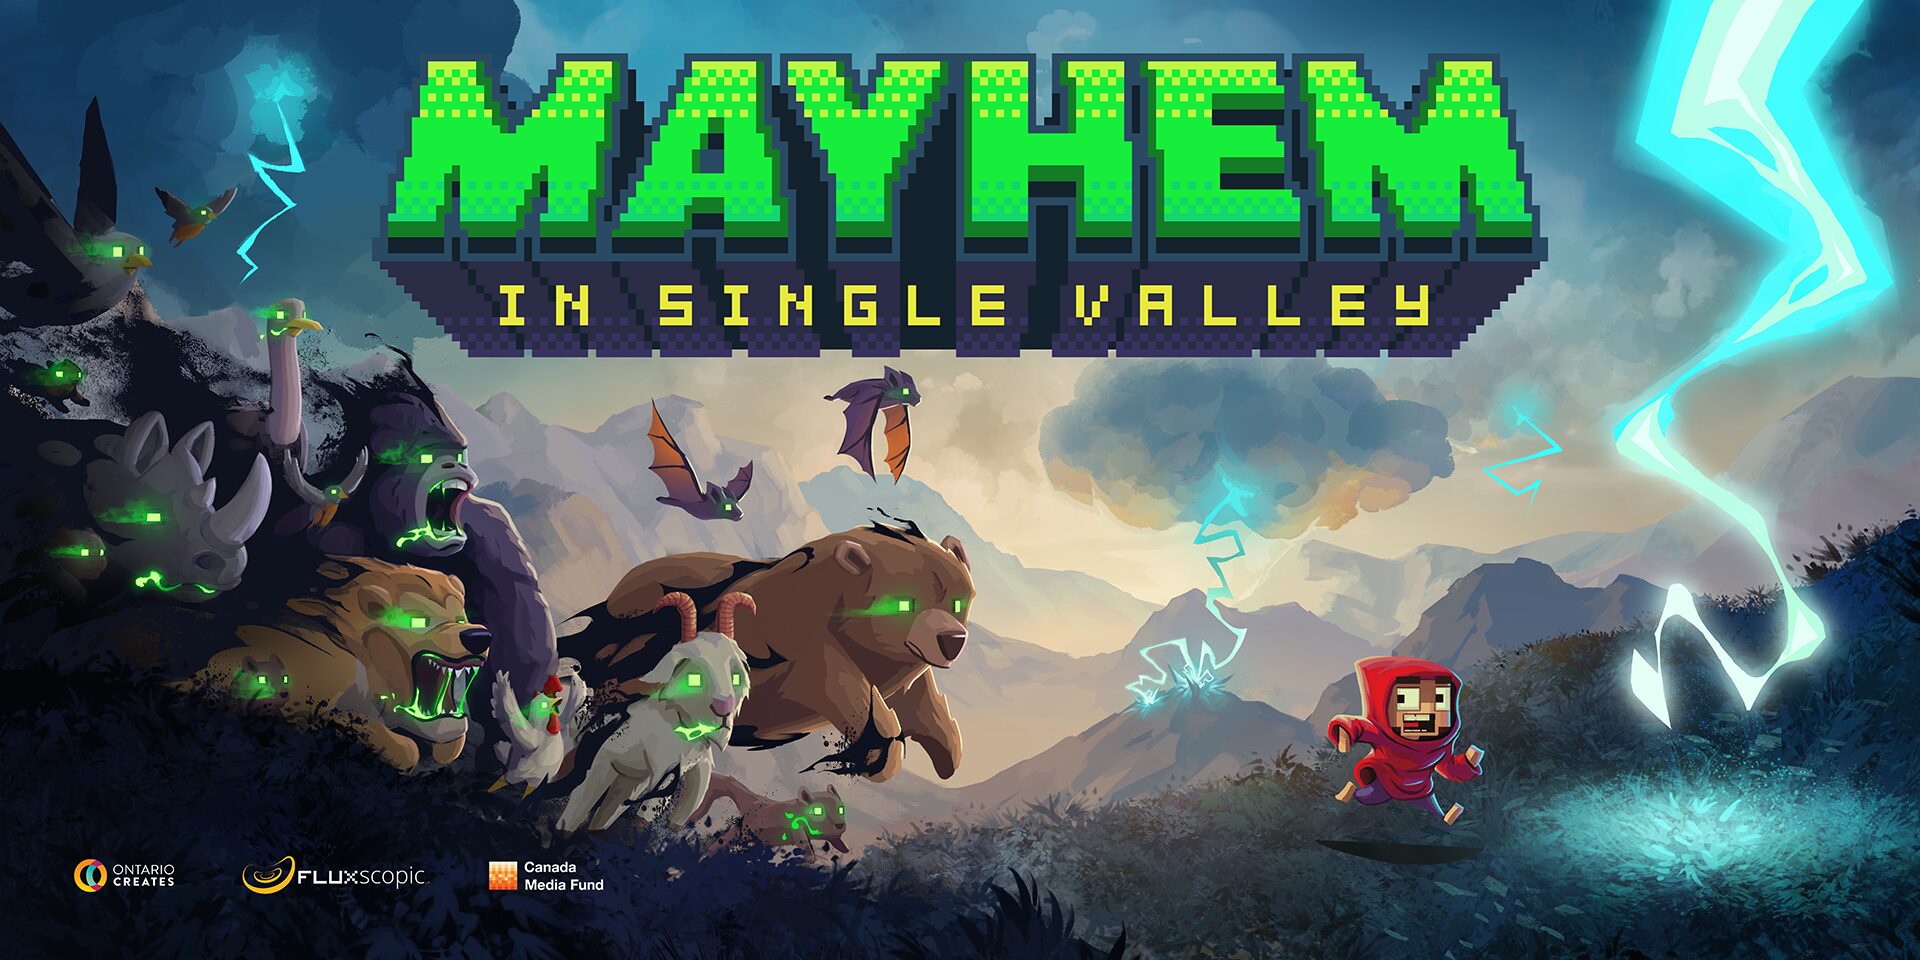 Stranger Things meets Zelda with radioactive squirrels in ‘Mayhem in Single Valley’